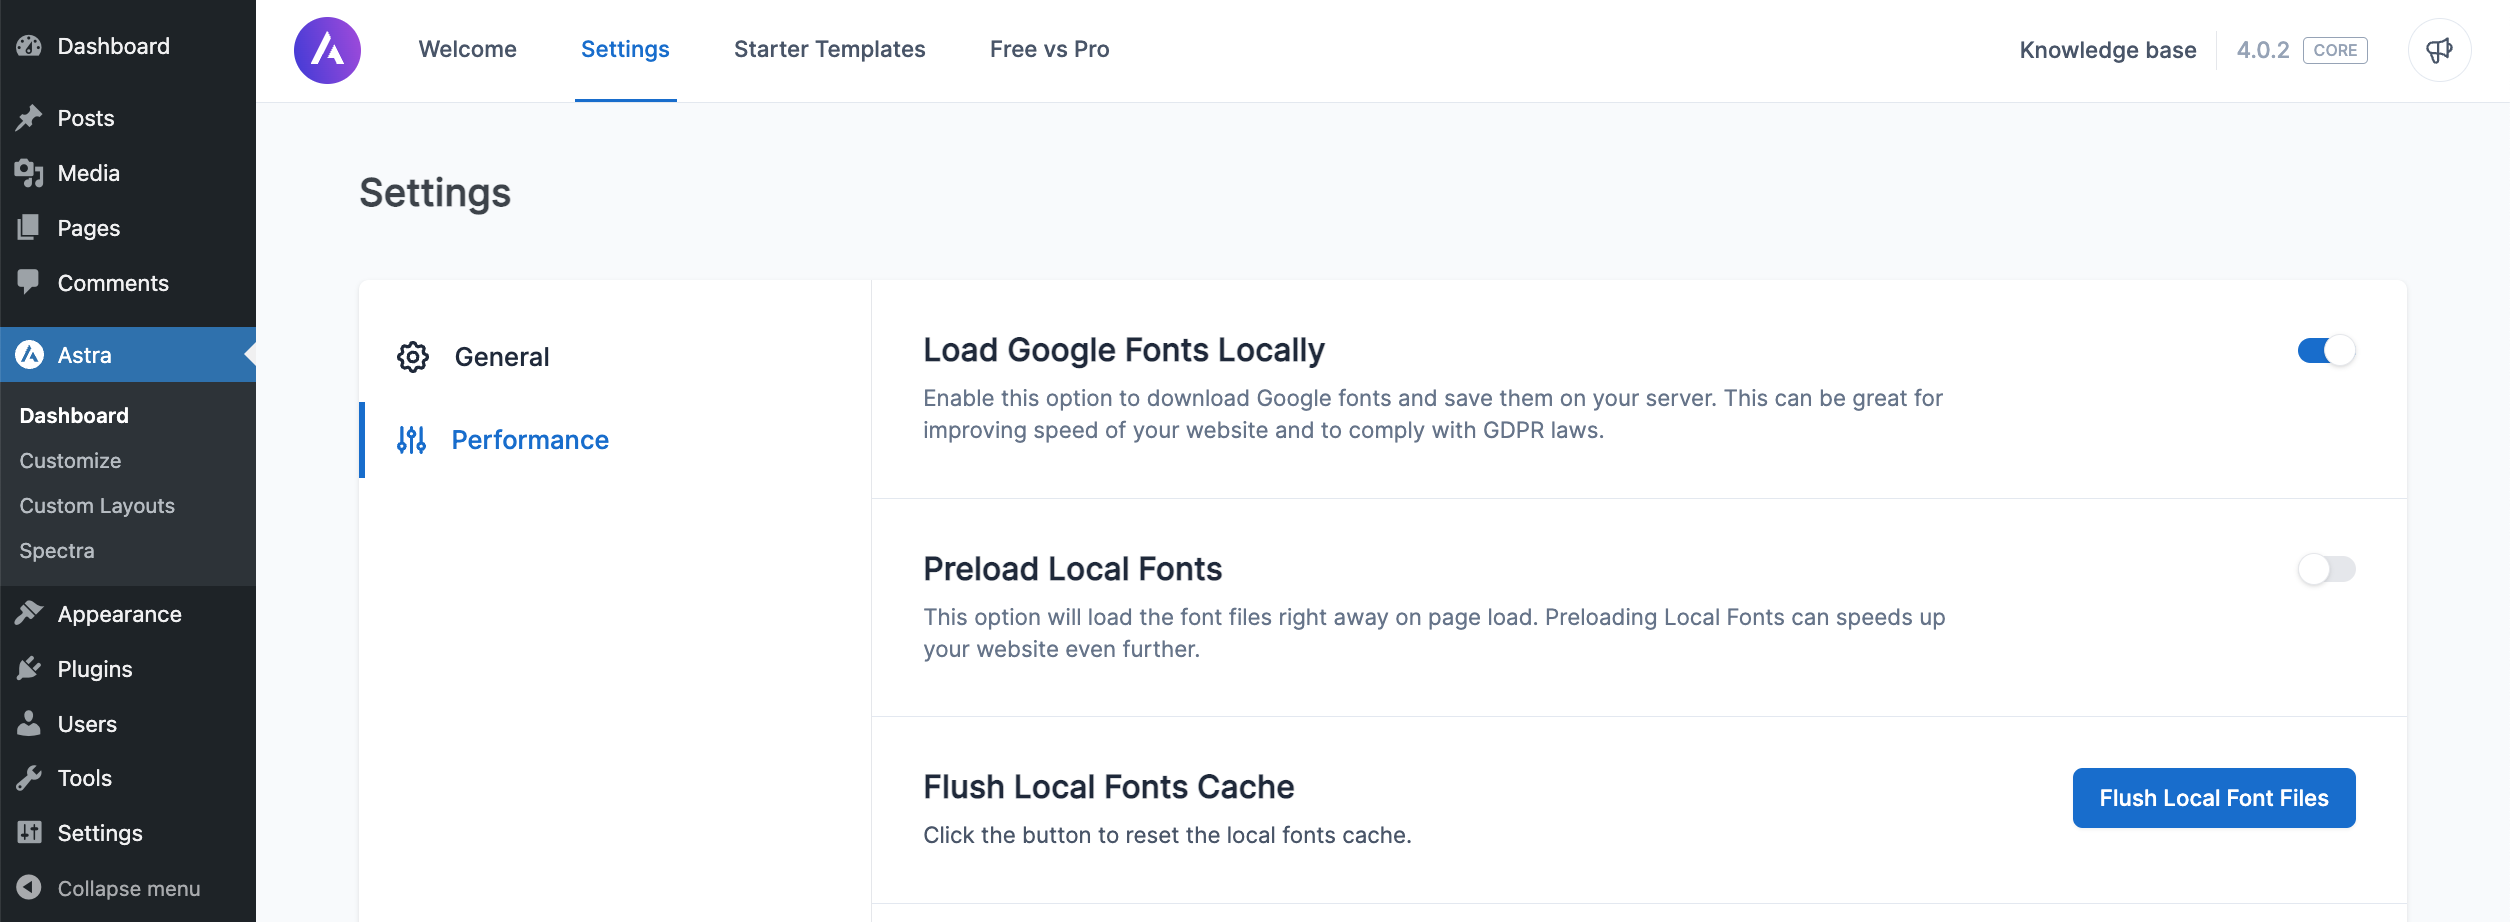 The Astra WordPress theme allows you to load Google Fonts locally to comply with GDPR laws.